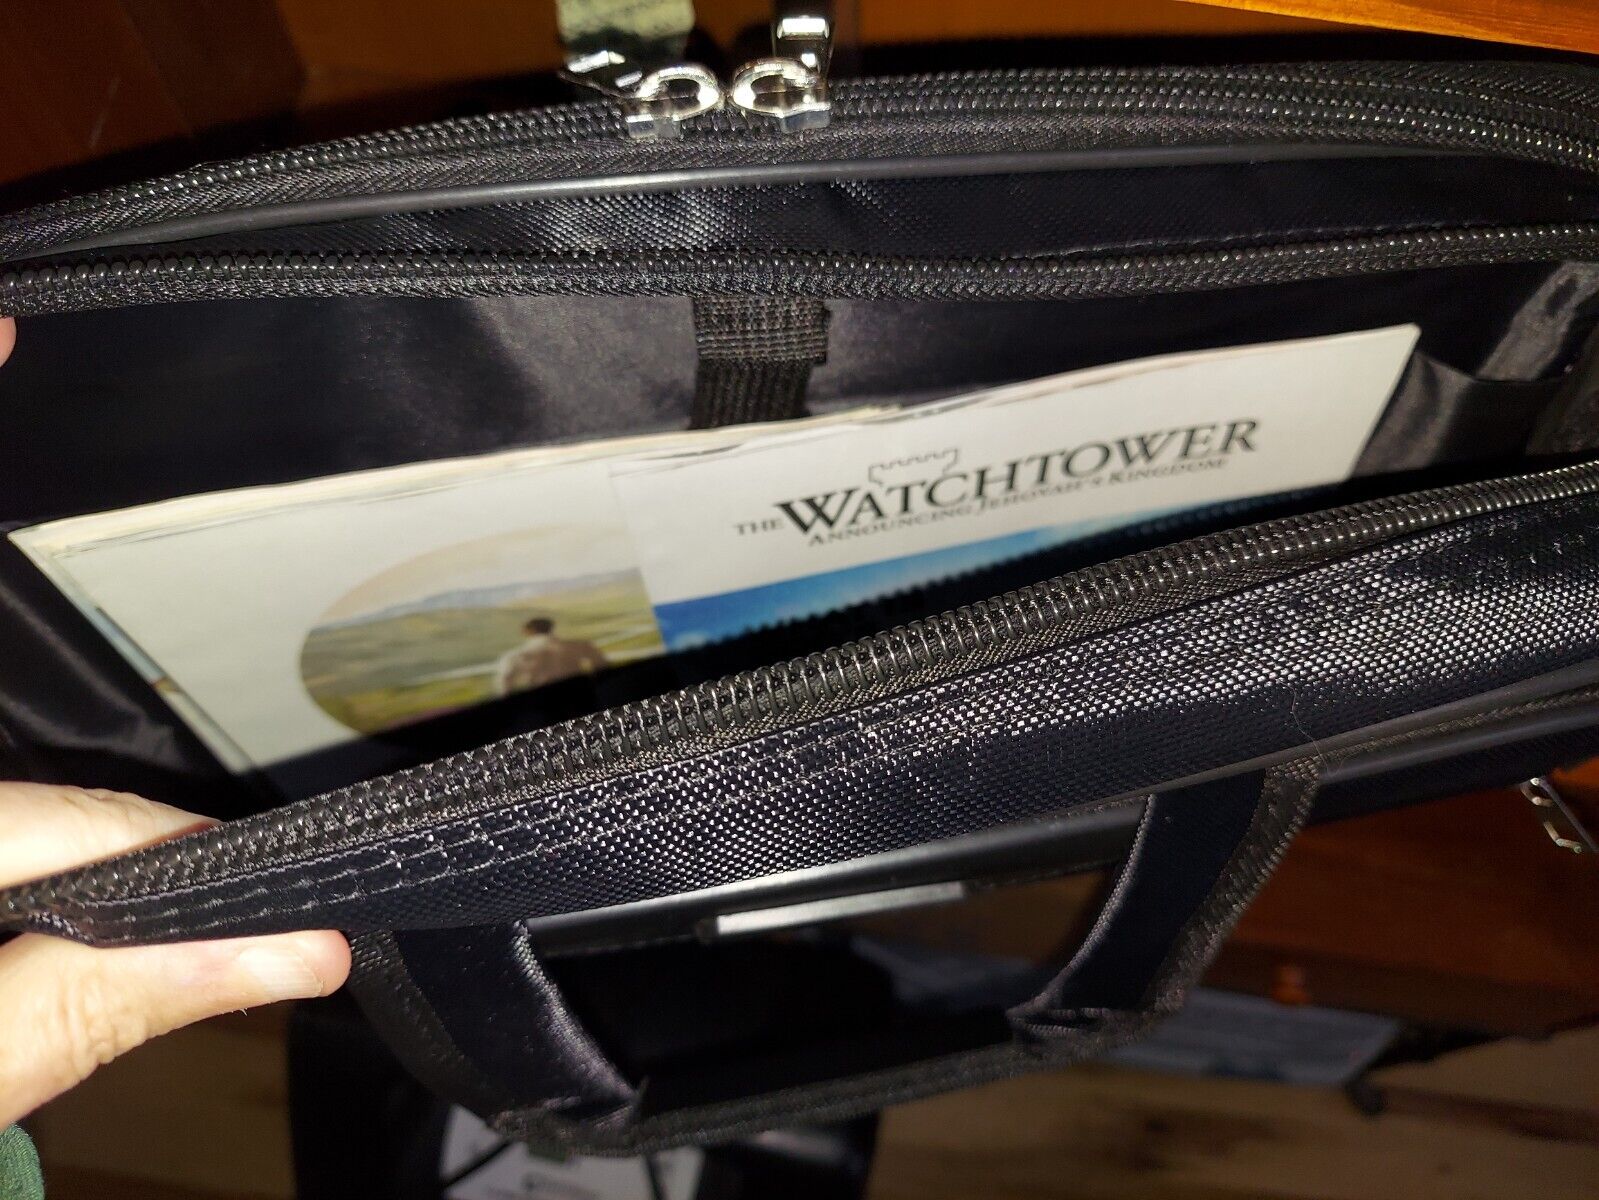 Witnessing Field Service or Meeting Bag Jehovah's Witnesses Watchtower black